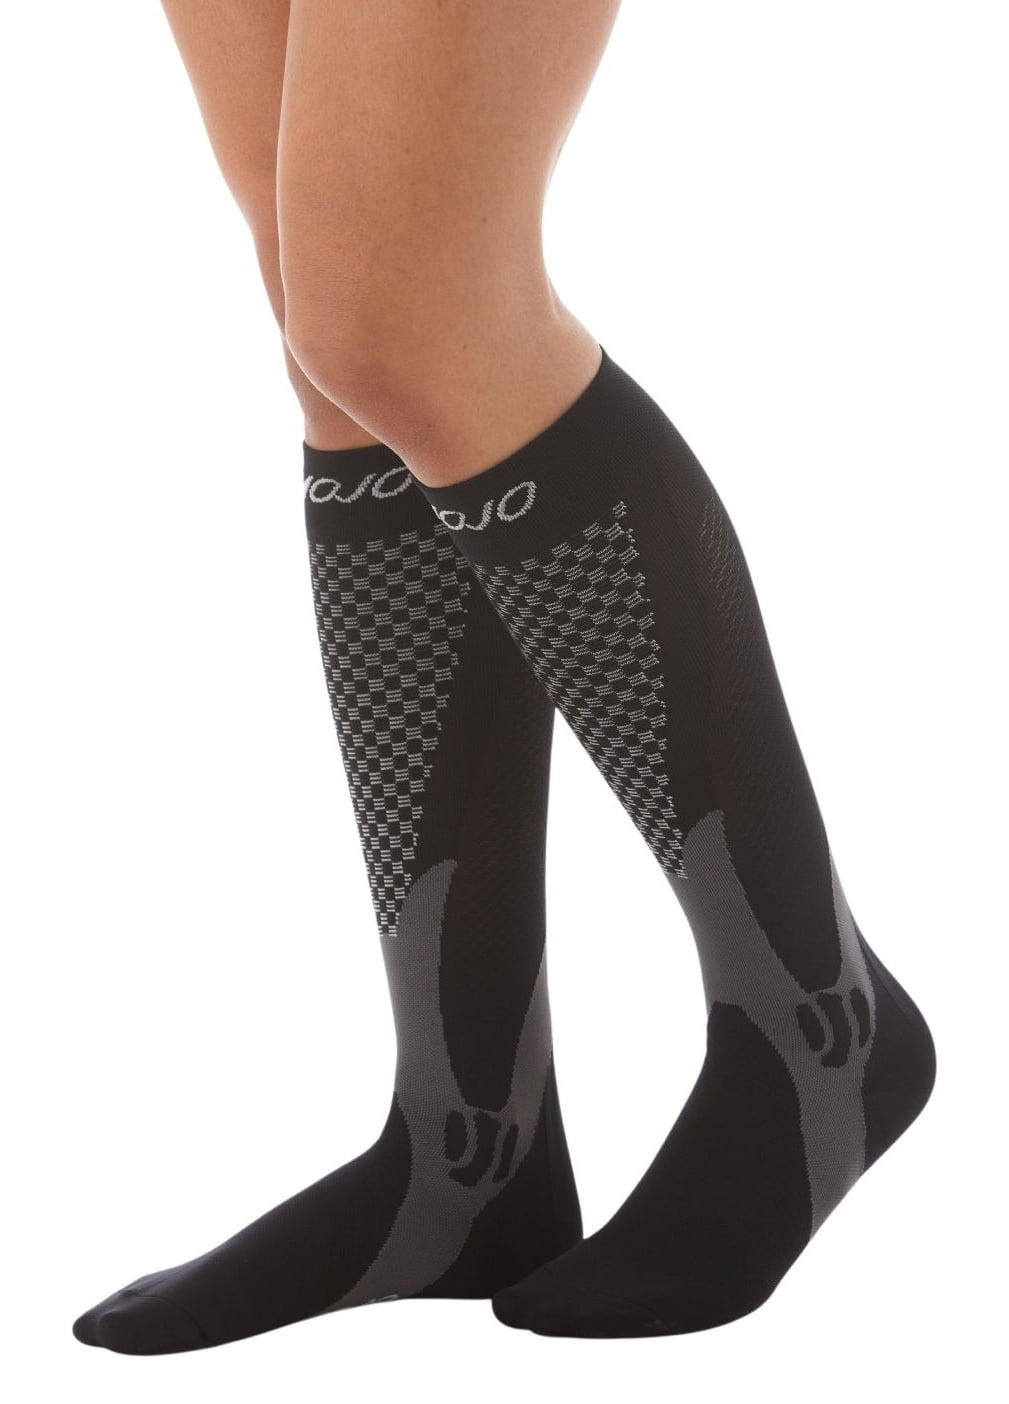 Mojo Opaque Compression Knee Socks For Men and Woman Pack of 3 